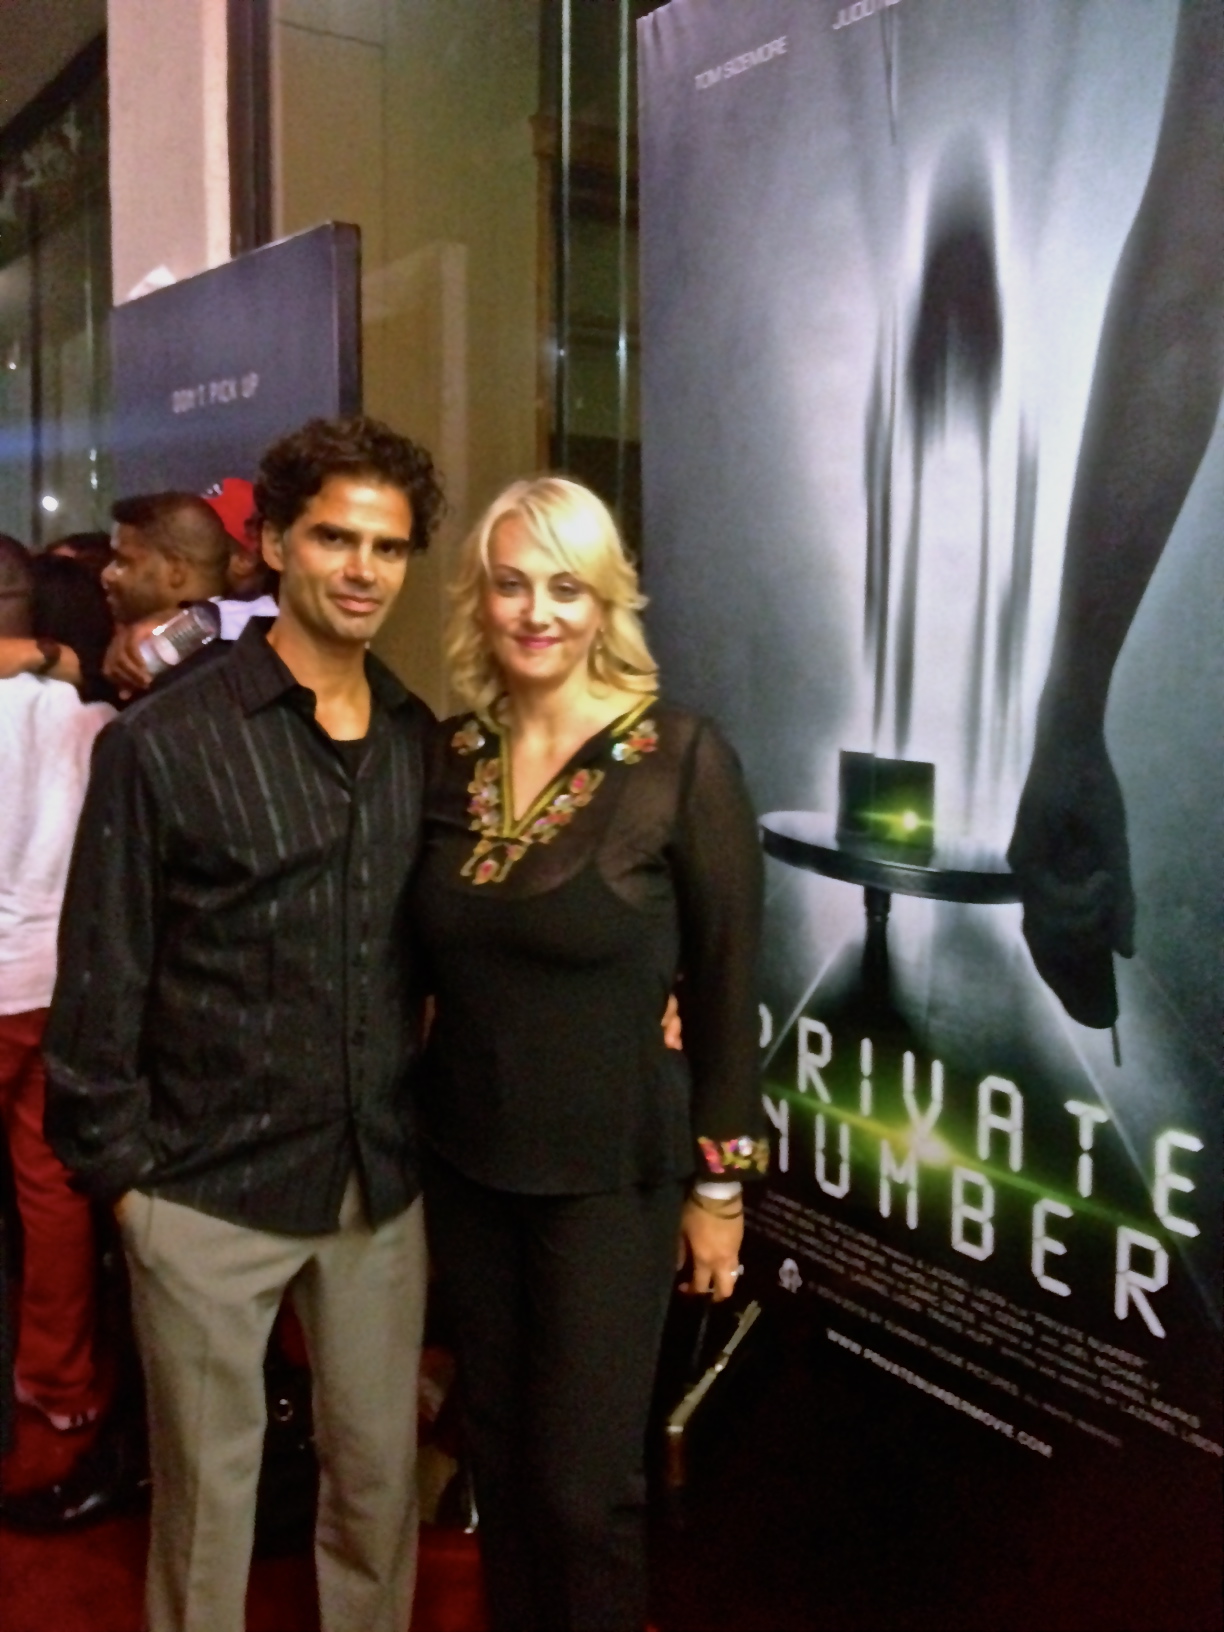 At the premiere screening of Private Number with Julien Roussel.